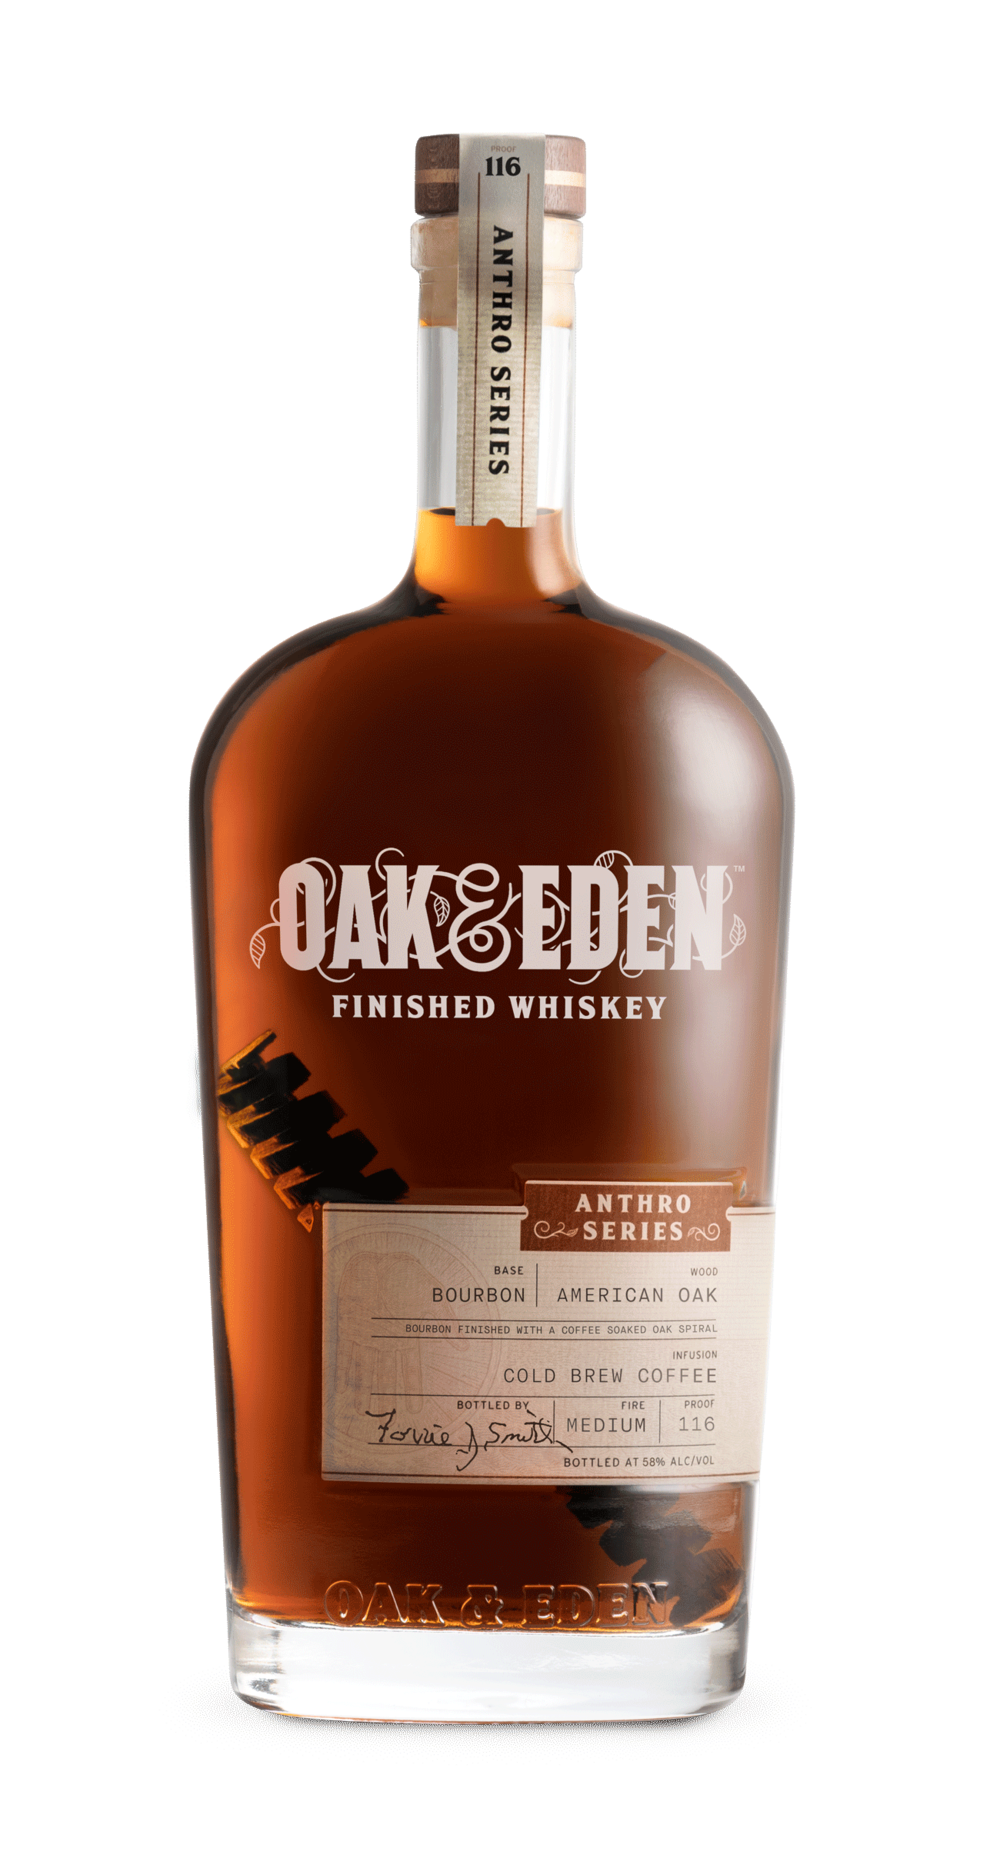 [BUY] Oak & Eden | Anthro Series: Forrie J Smith | Cold Brew Coffee Infused Bourbon Whiskey at CaskCartel.com